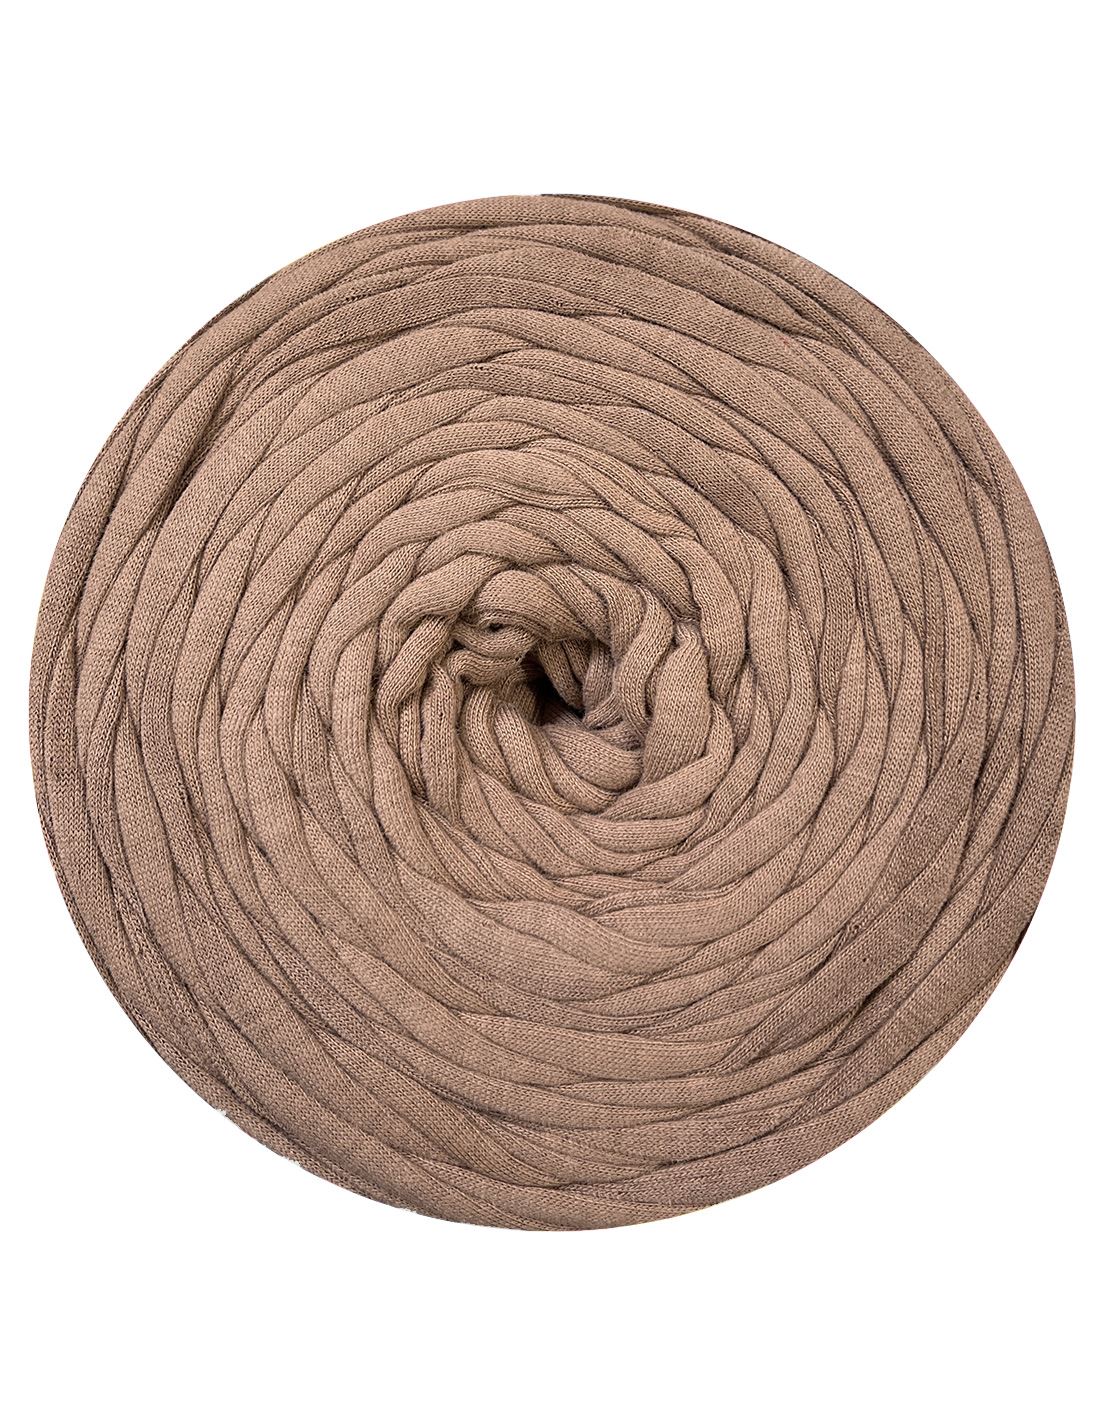 Muted taupe t-shirt yarn by Rescue Yarn (100-120m)